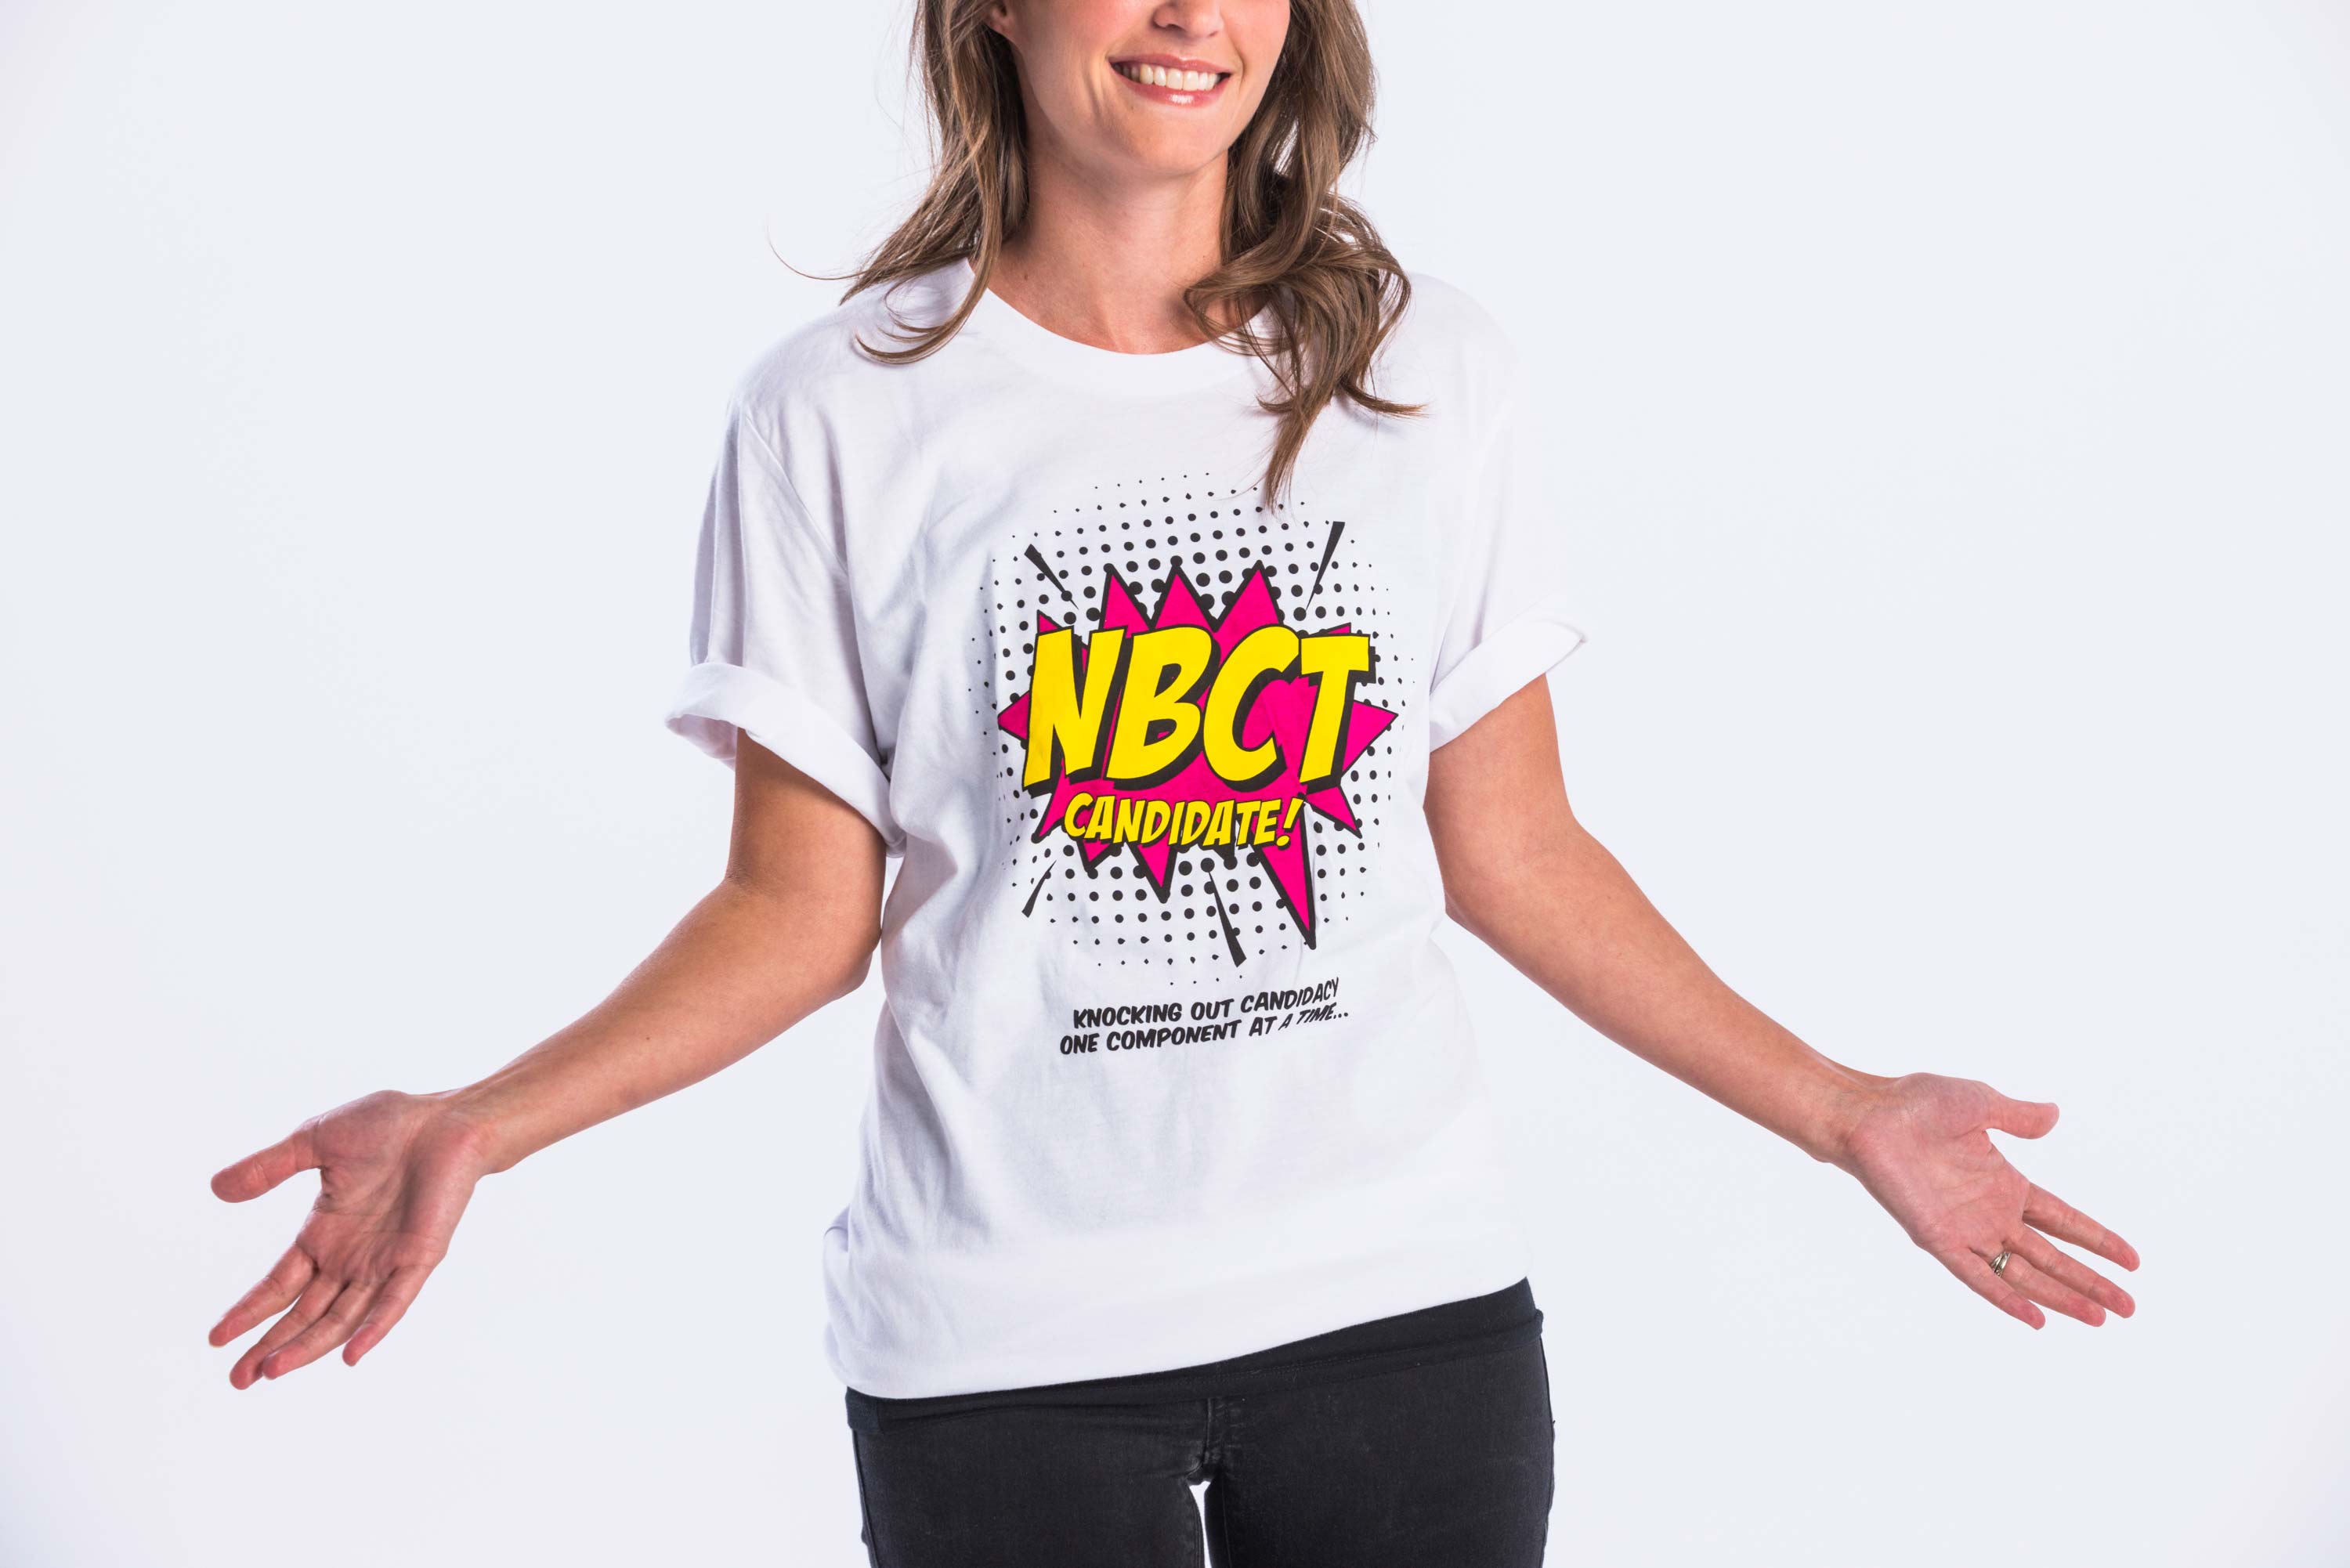 2018 National Board Candidate T-Shirt